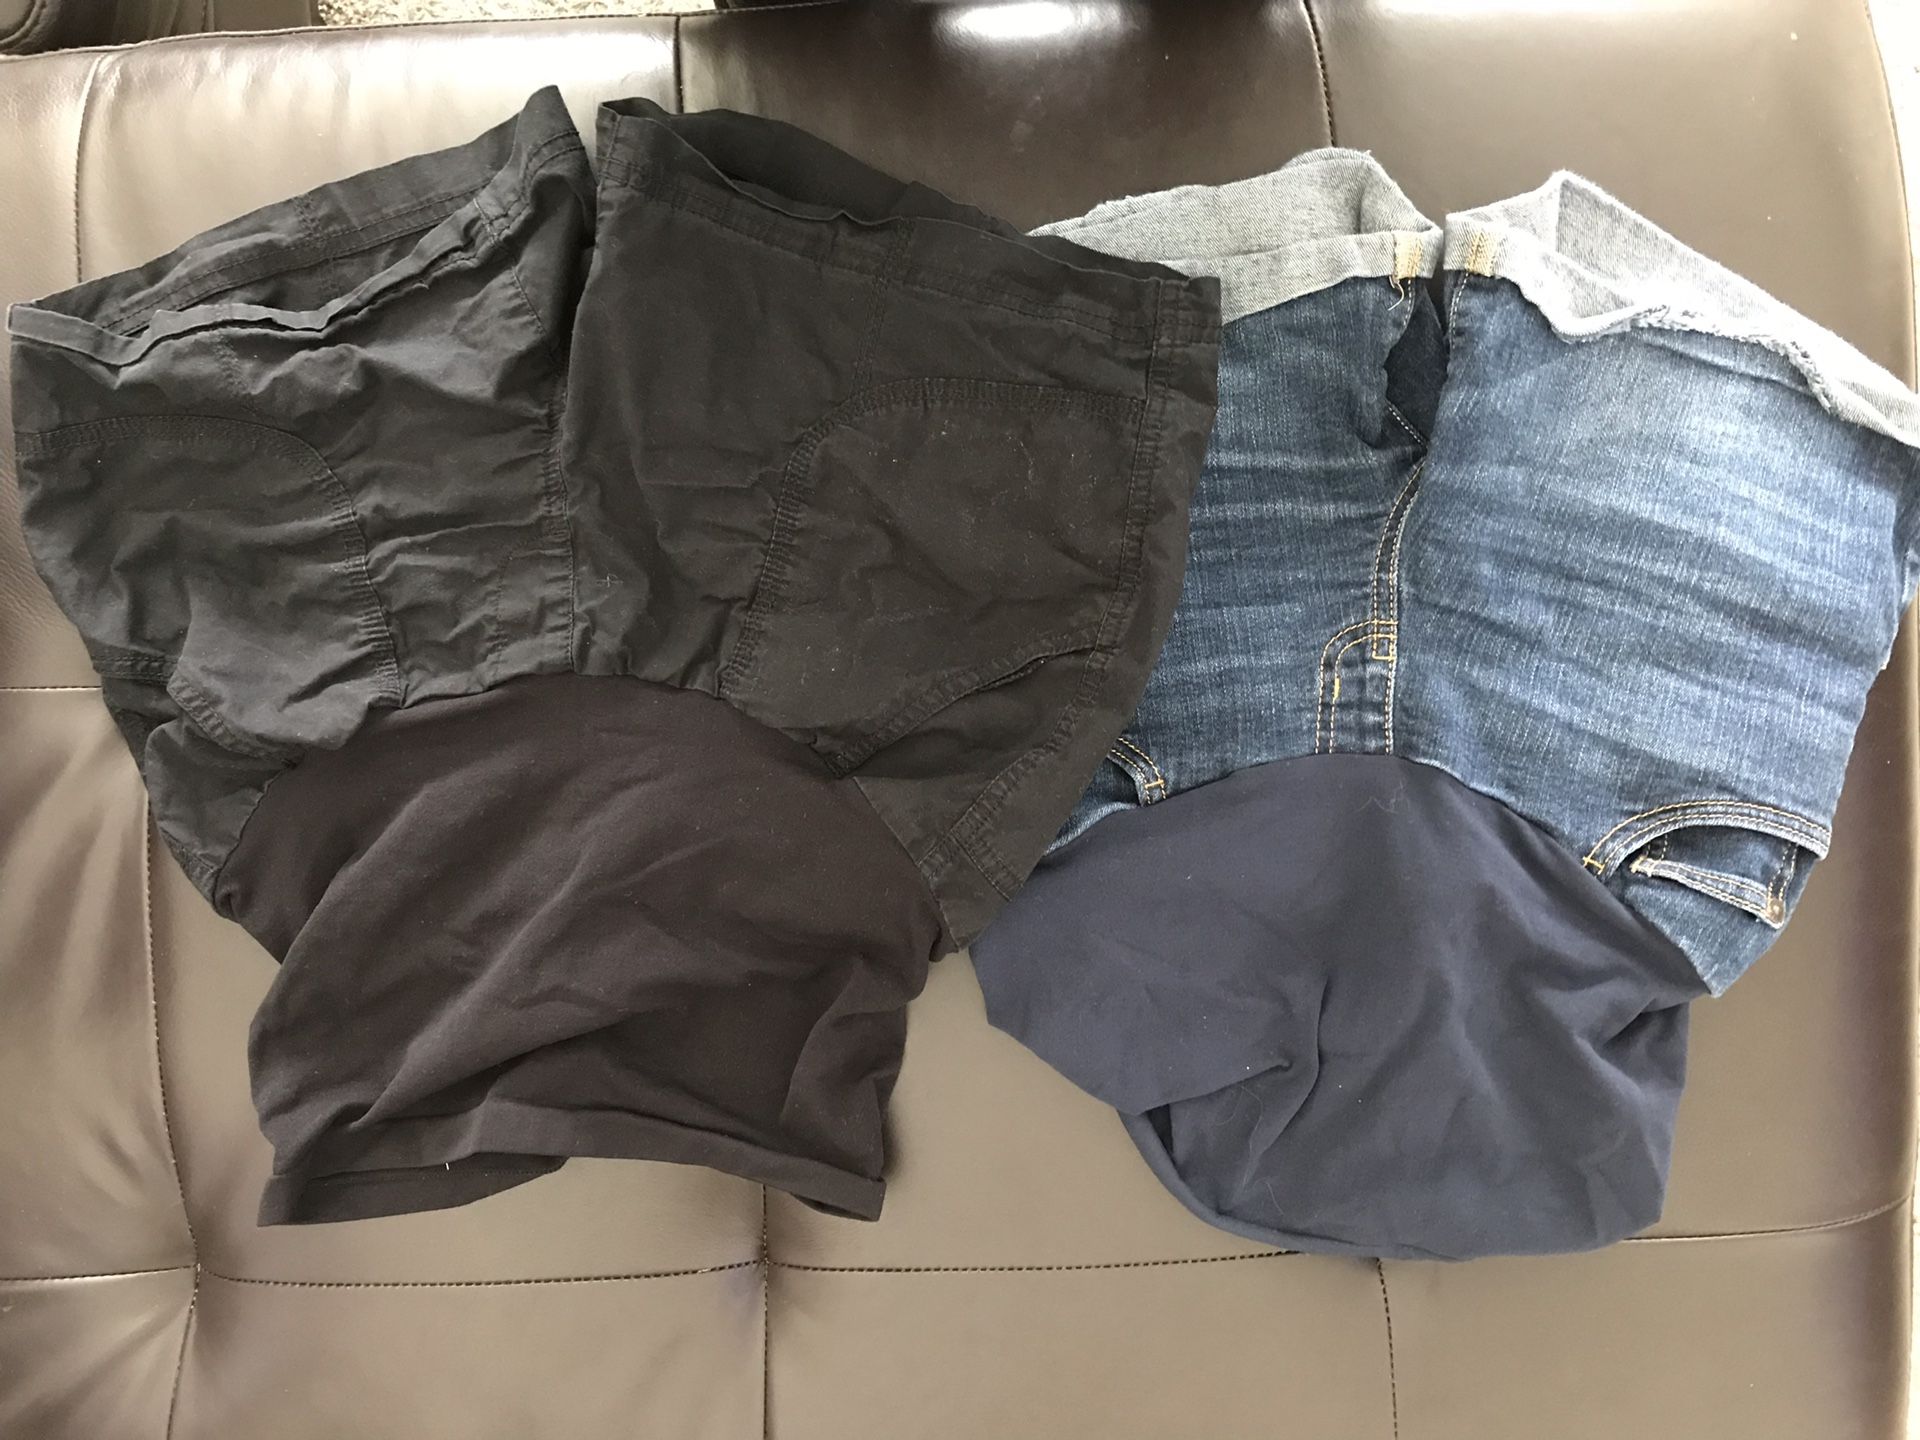 Assortment of maternity clothes sizes XS and S